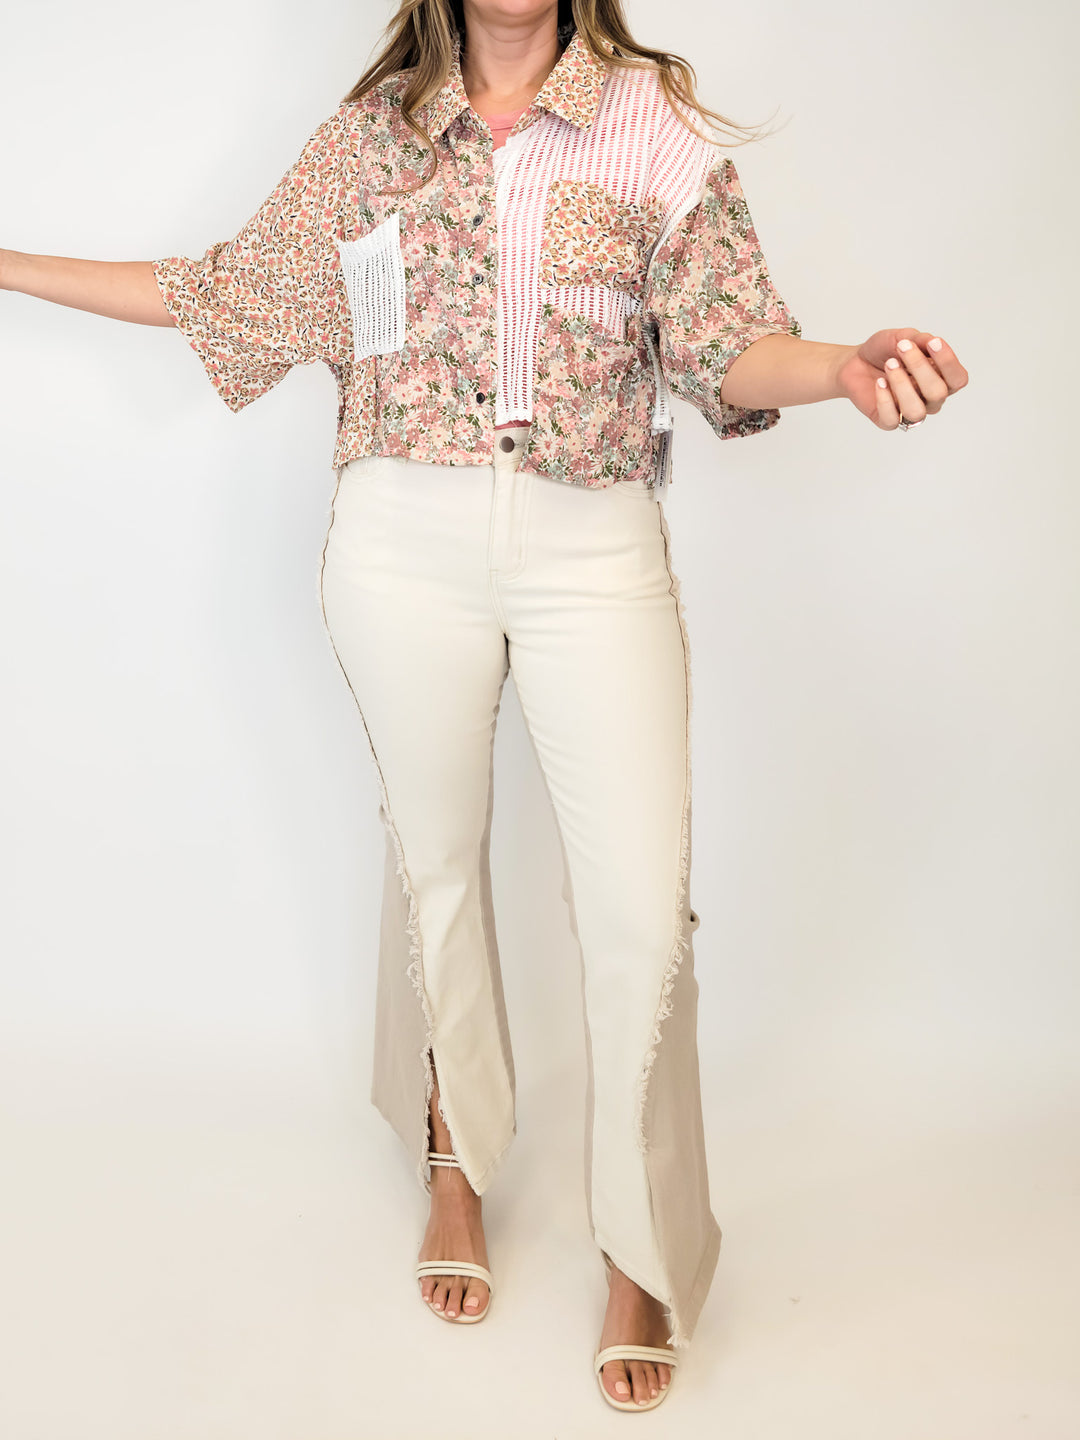 CROPPED FLORAL AND CROCHET BUTTON UP TOP - WHITE/MAUVE